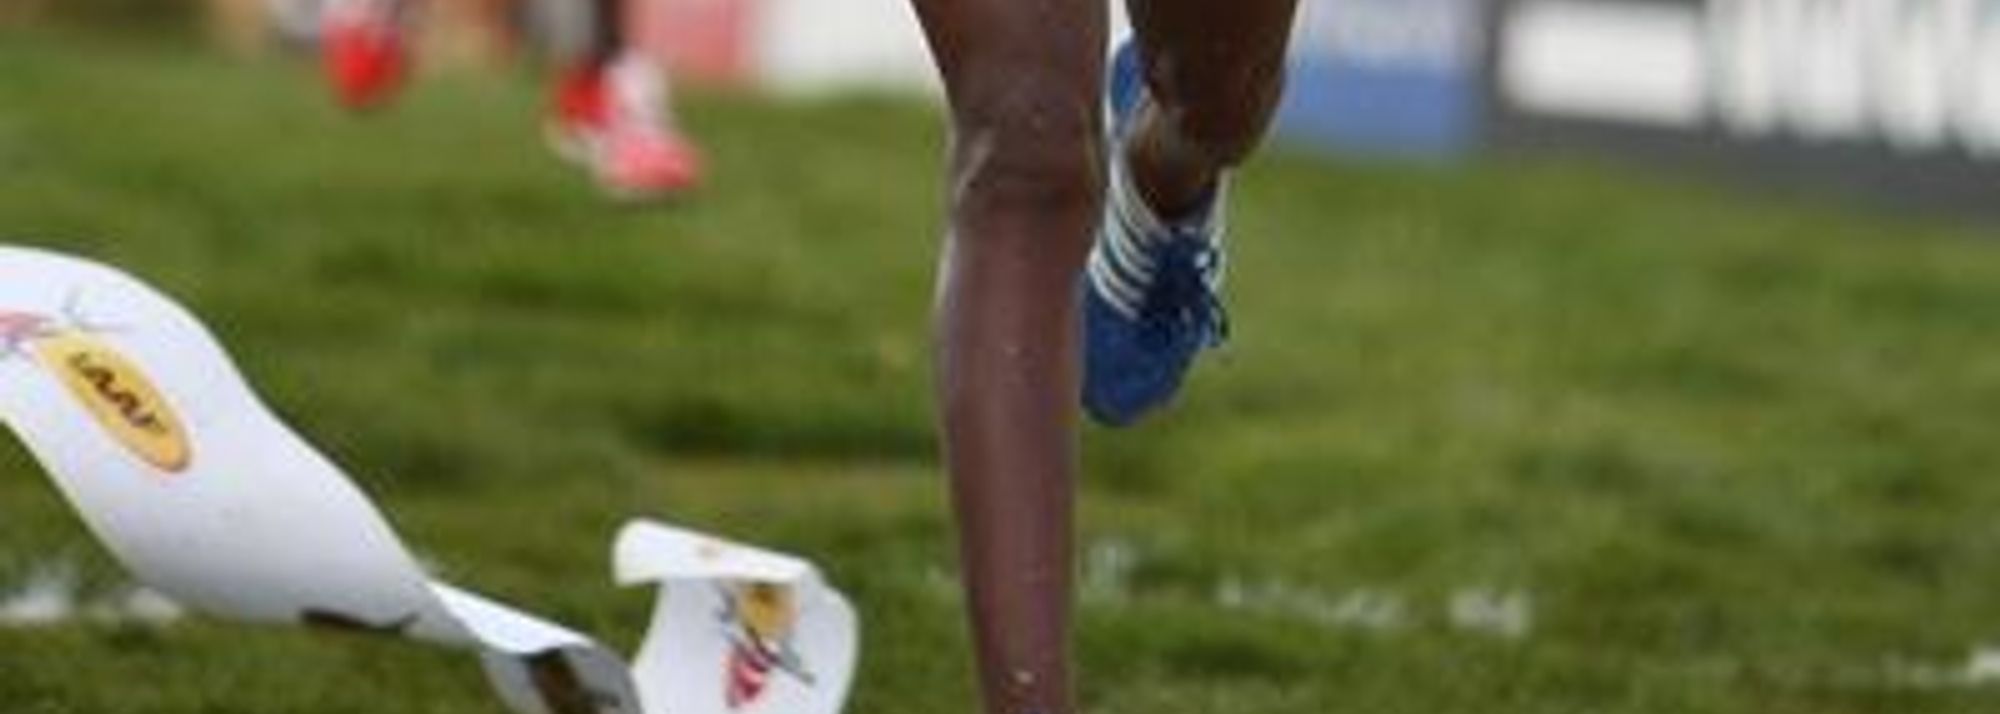 - Just as Linet Masai was perhaps savouring the prospect of being the woman to break a 15-year drought of Kenyan wins in the long-race at the World Cross Country championships, her teammate Florence Kiplagat burst past her on the grueling final hill to take the championships gold medal.</p>